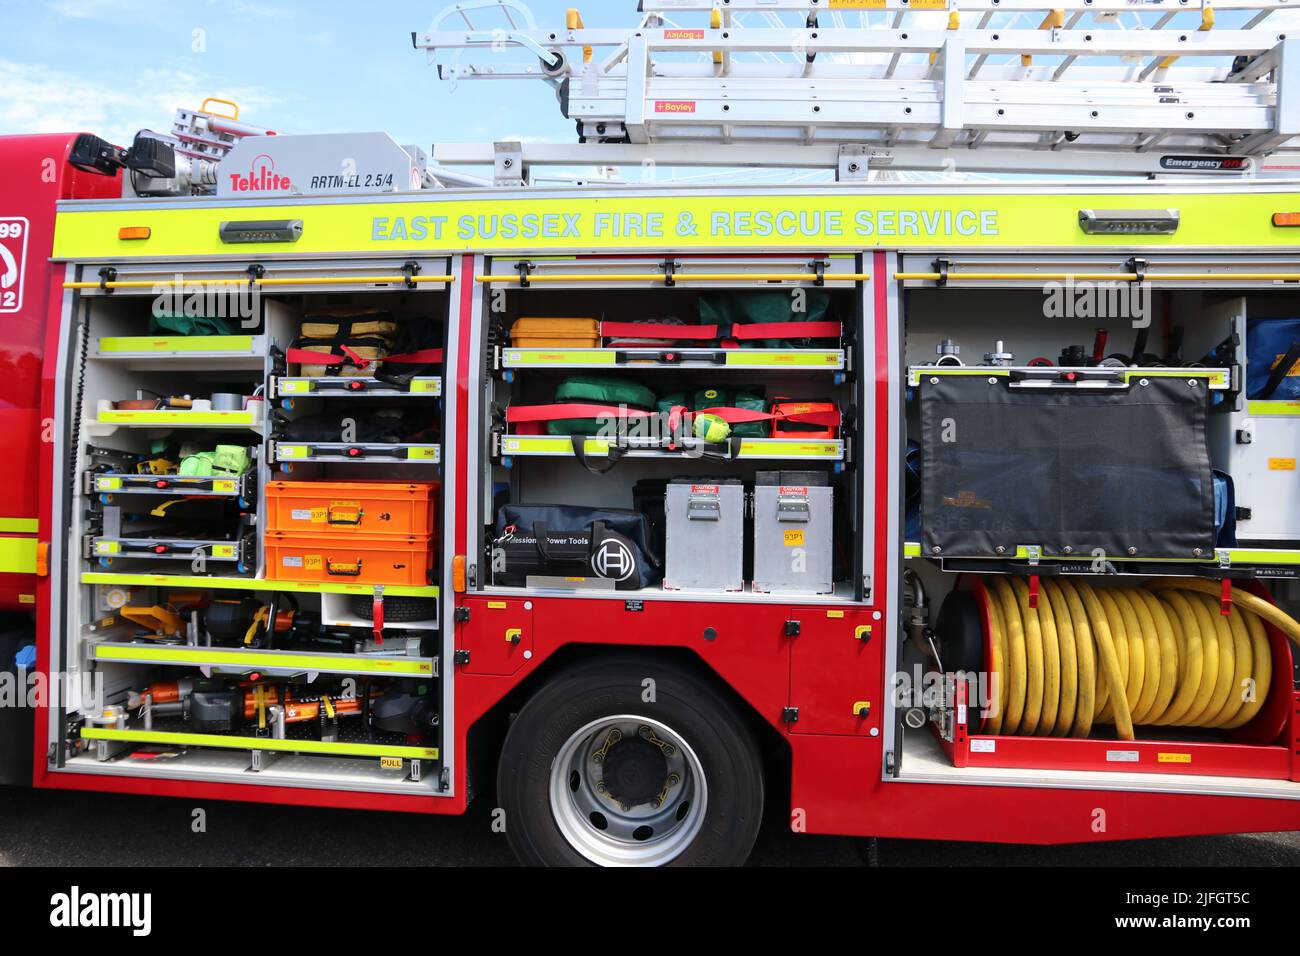 EAST SUSSEX FIRE & RESCUE SERVICE AT EASTBOURNE 999 WEEKEND EMERGENCY SERVICES DISPLAY SHOW IN 2022 Stock Photo